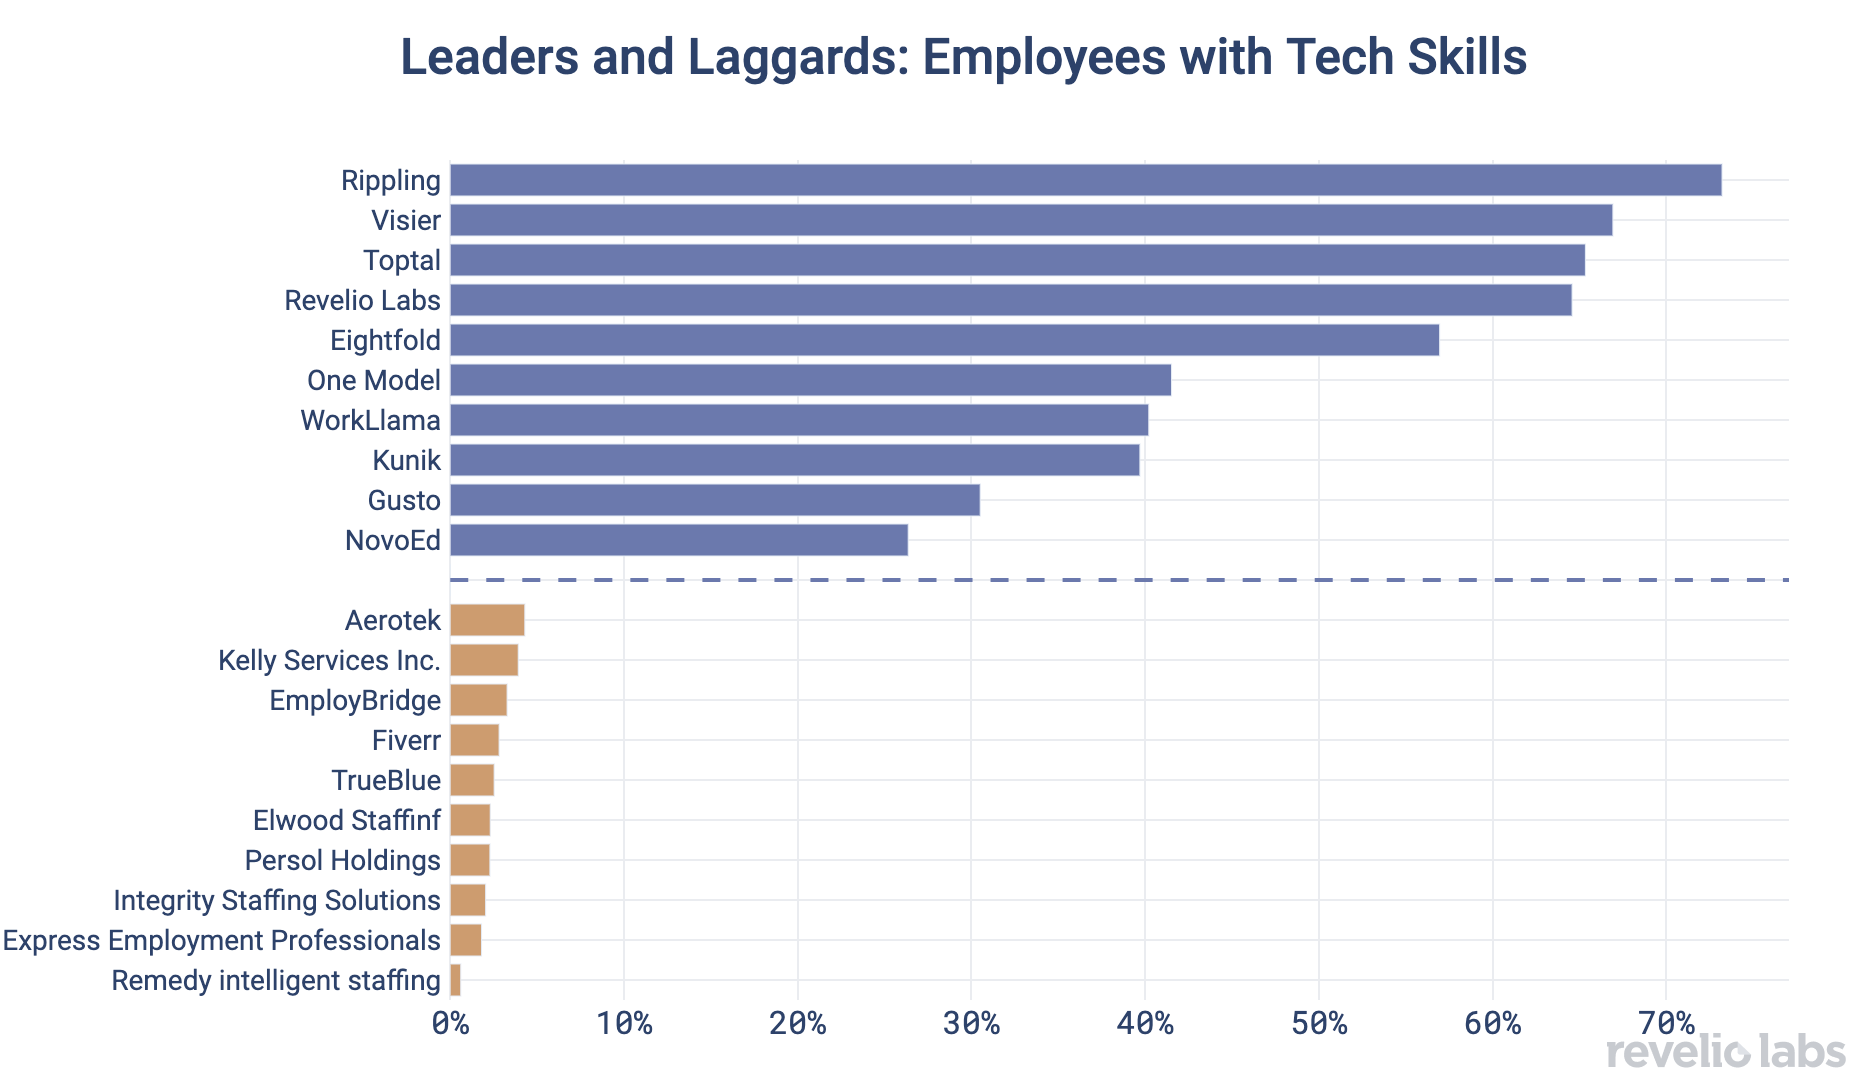 Leaders and Laggards: Employees with Tech Skills